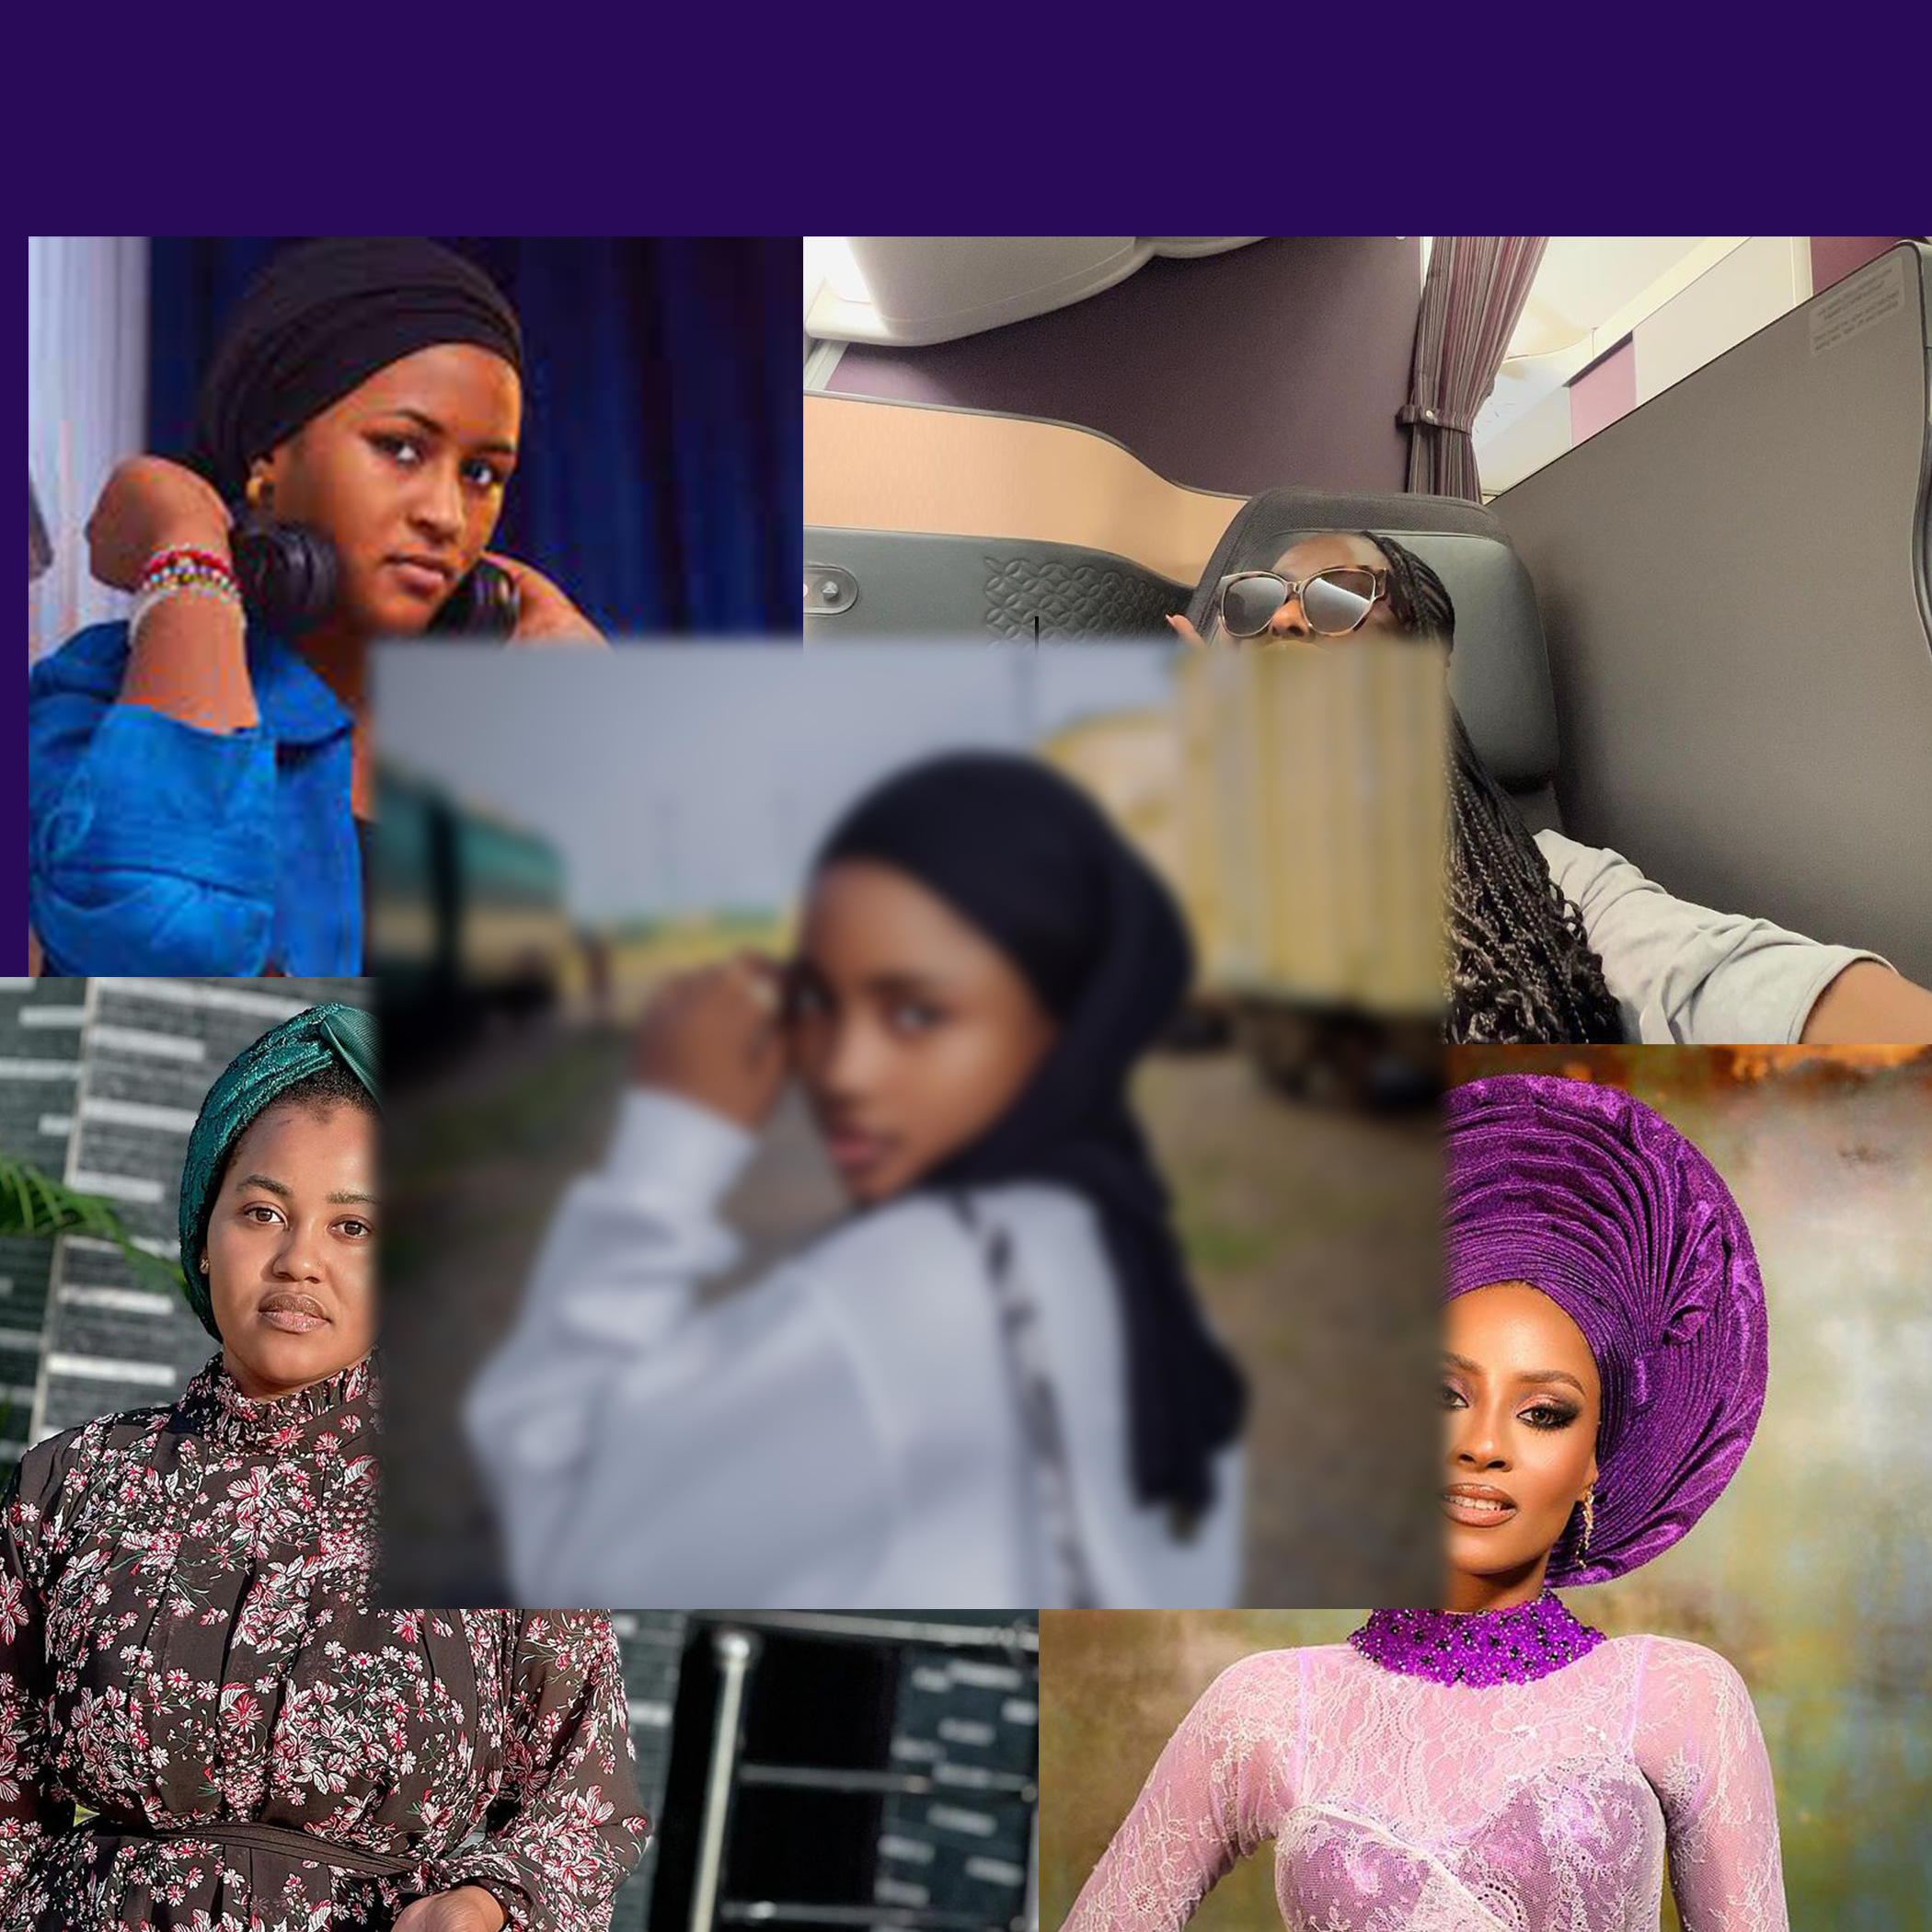 True Beauty Shines: 5 Kannywood Actresses In Their Natural Skin Glory